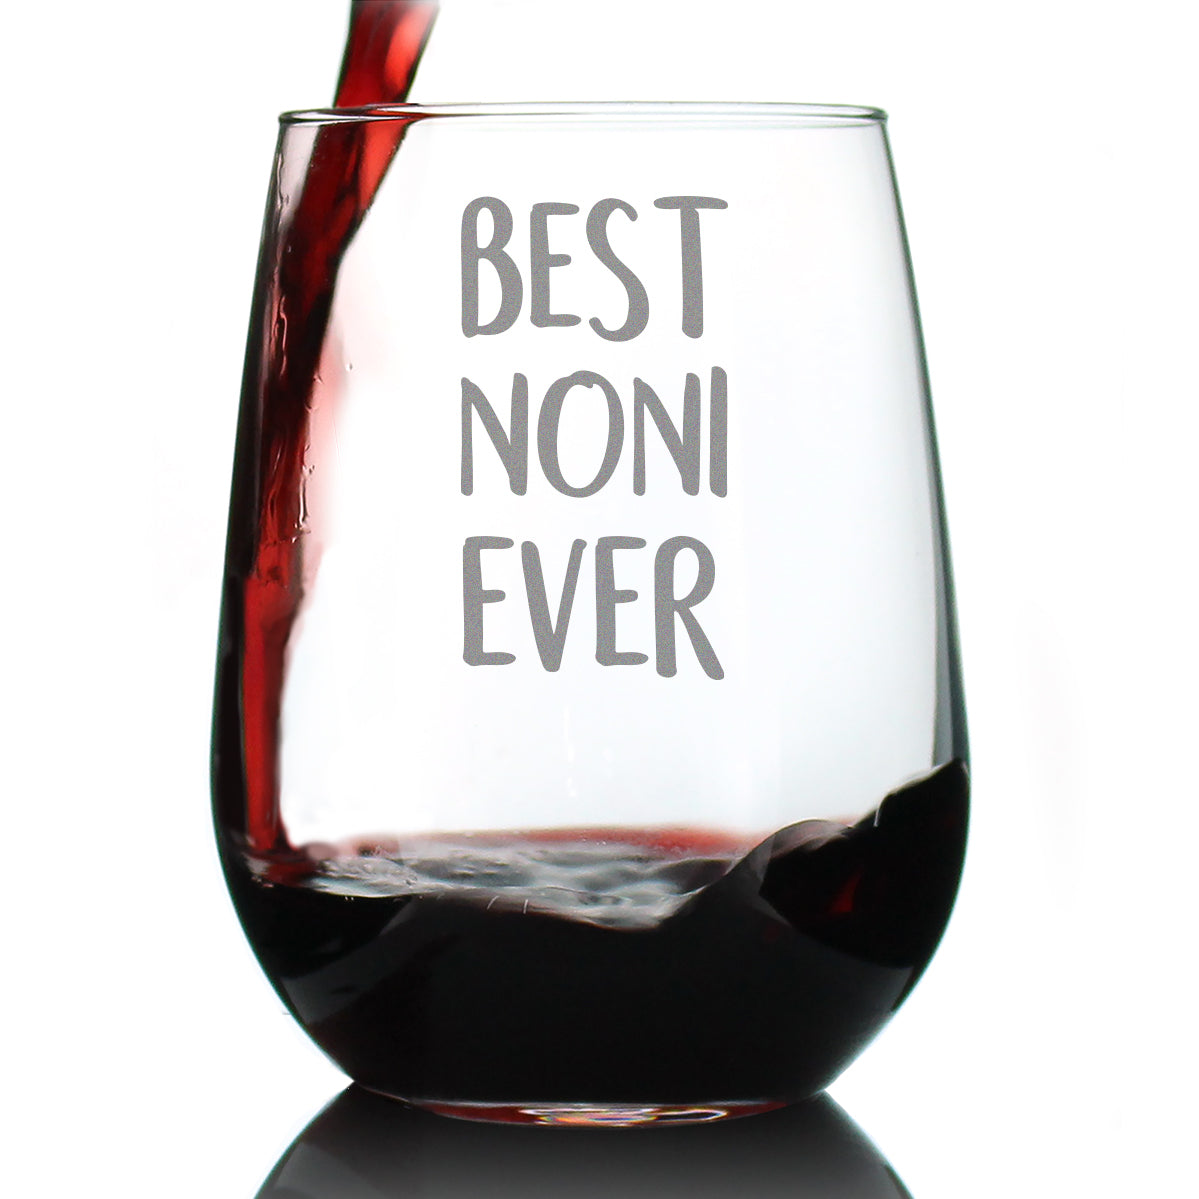 Best Noni Ever Cute Funny Stemless Wine Glass, Large 17 Ounce Size, Etched Sayings, Gift for Grandma